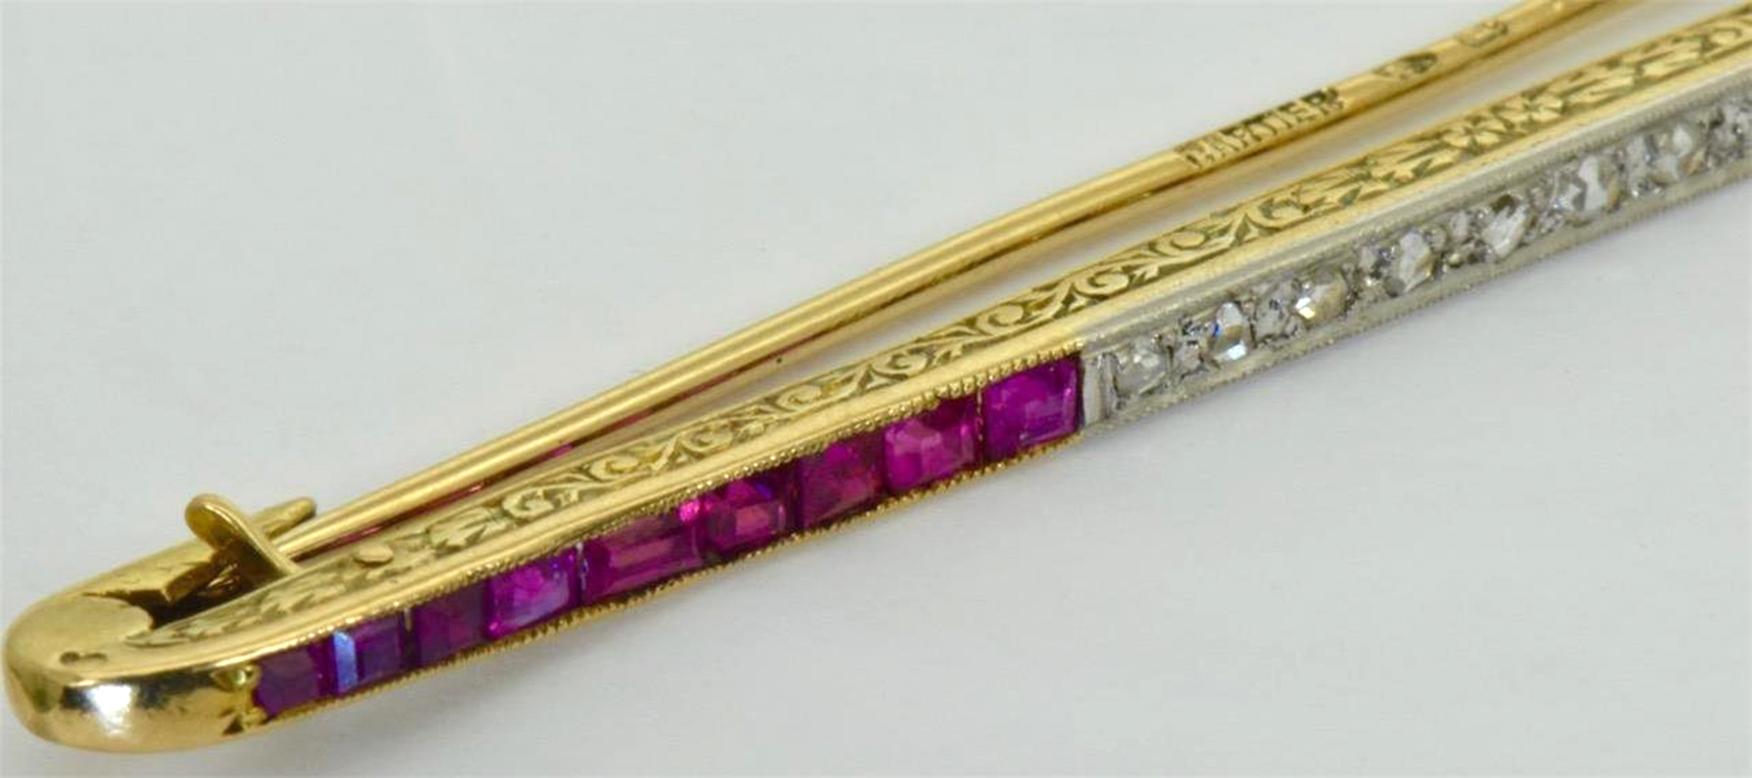 Women's Antique French Cartier Diamond and Rubies Gold Brooch, 1920s For Sale